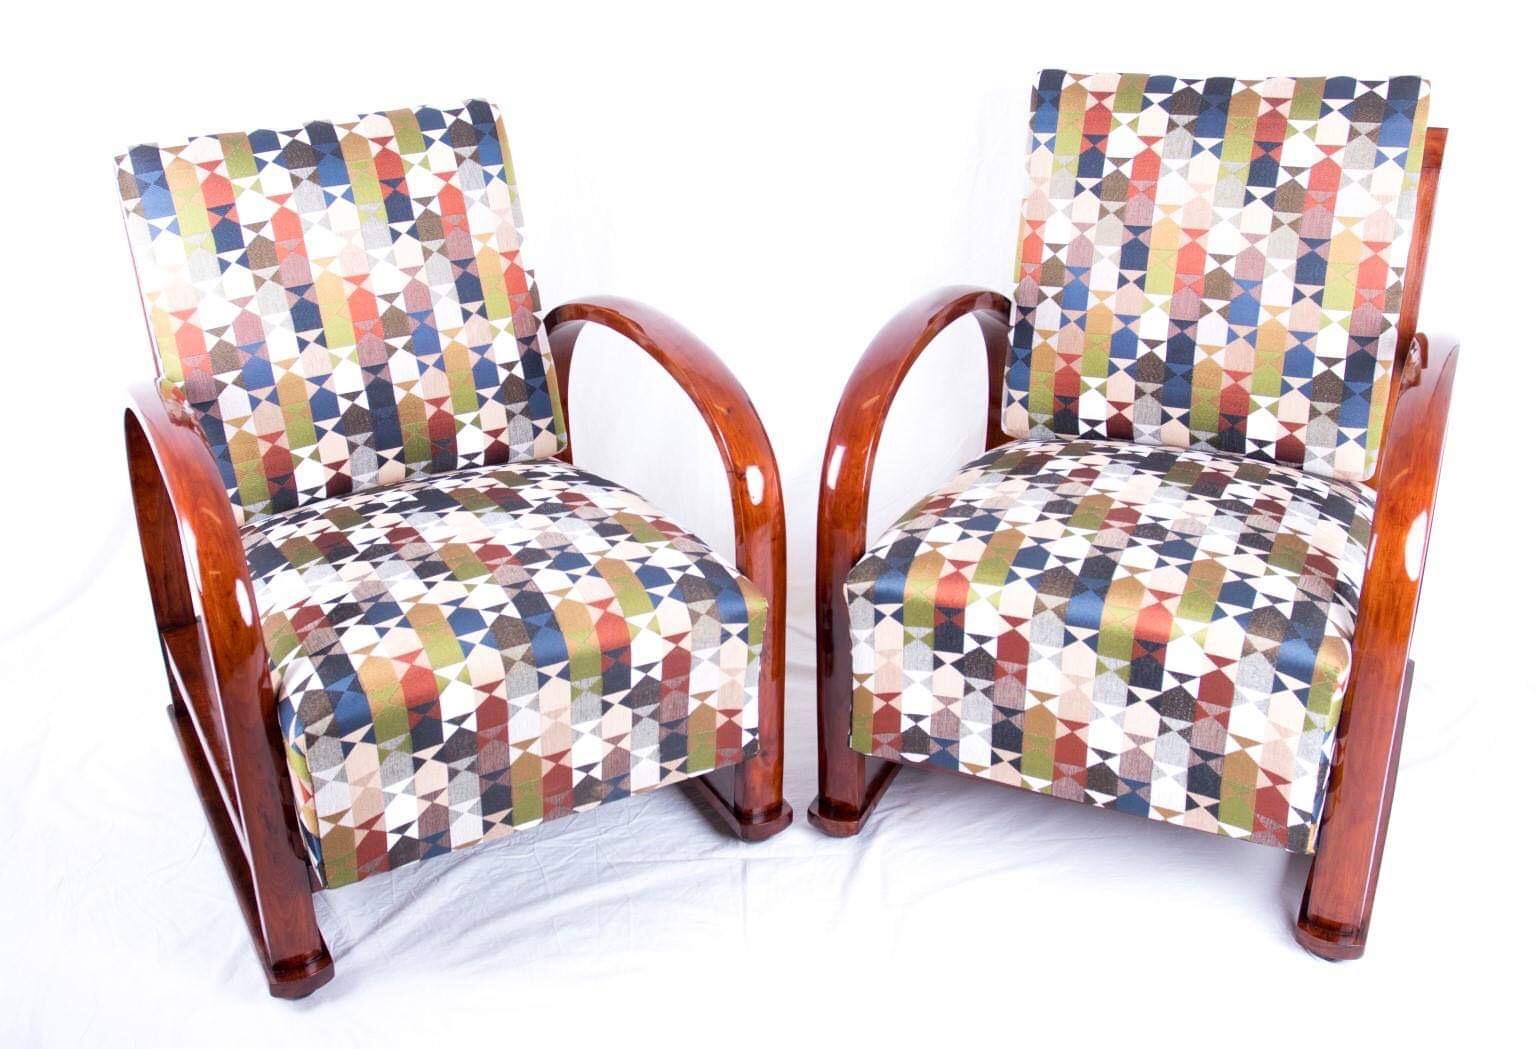 Viennese Art Deco armchairs are original and completely restored in high quality with new upholstery and fabric, and wood is selackpolitur. Original Art Deco fabric, the chair can be folded into three position.